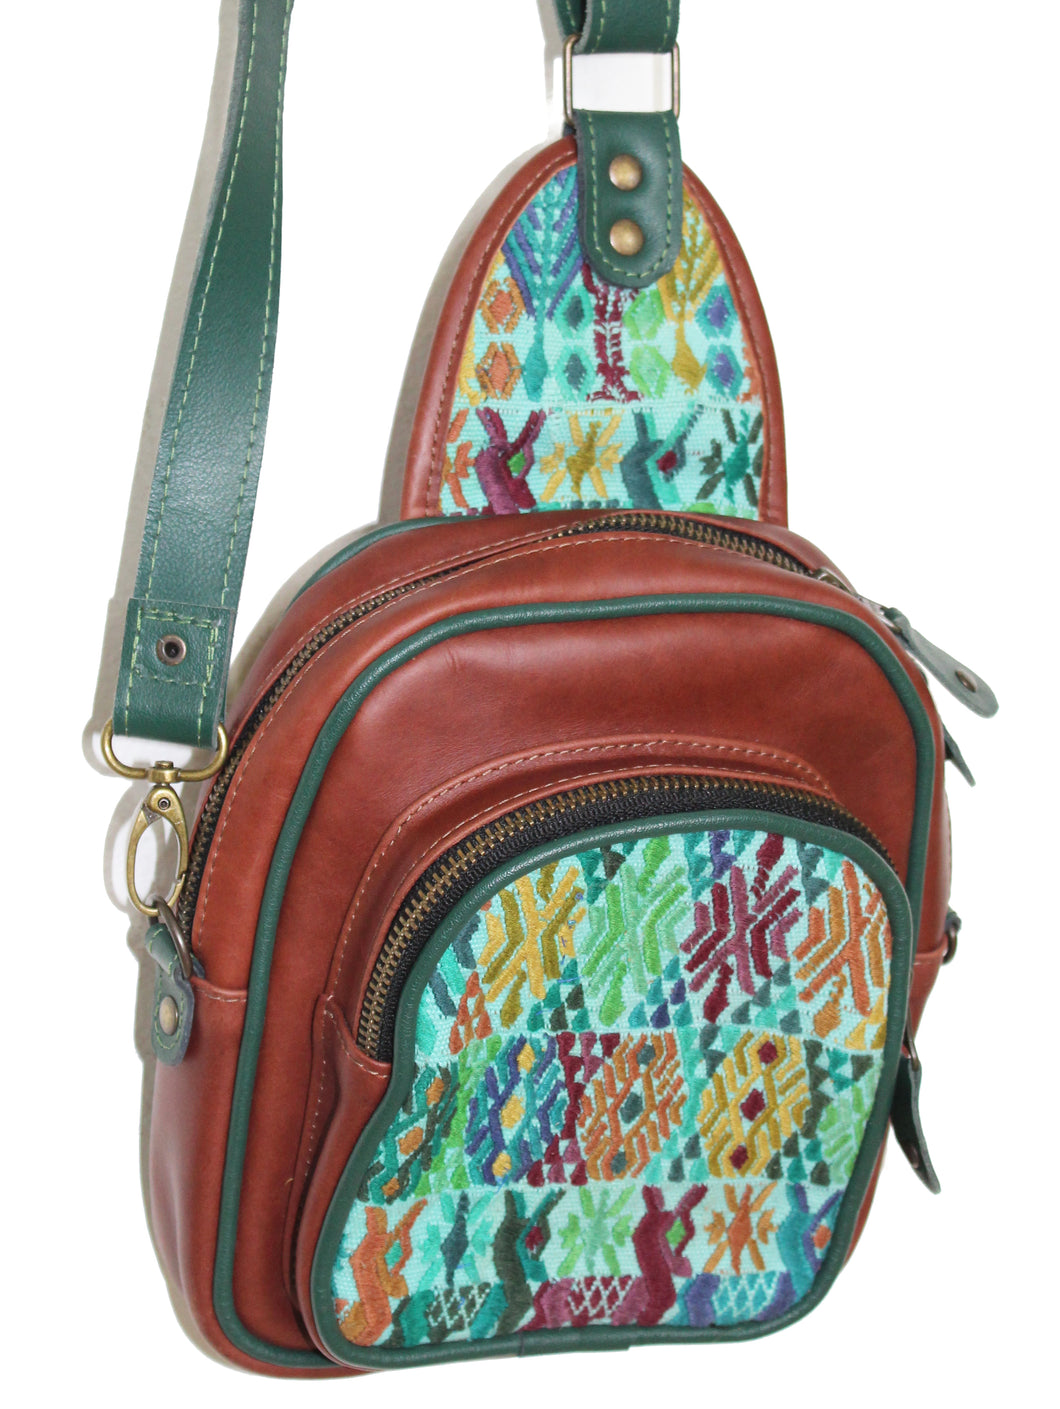 MoonLake Designs Blake Sling Over Backpack Bag in red brown (burnt sienna) with geometric huipil in shades of greens, blues, and complementary colors featuring dark green leather adjustable strap and multiple easy access pockets